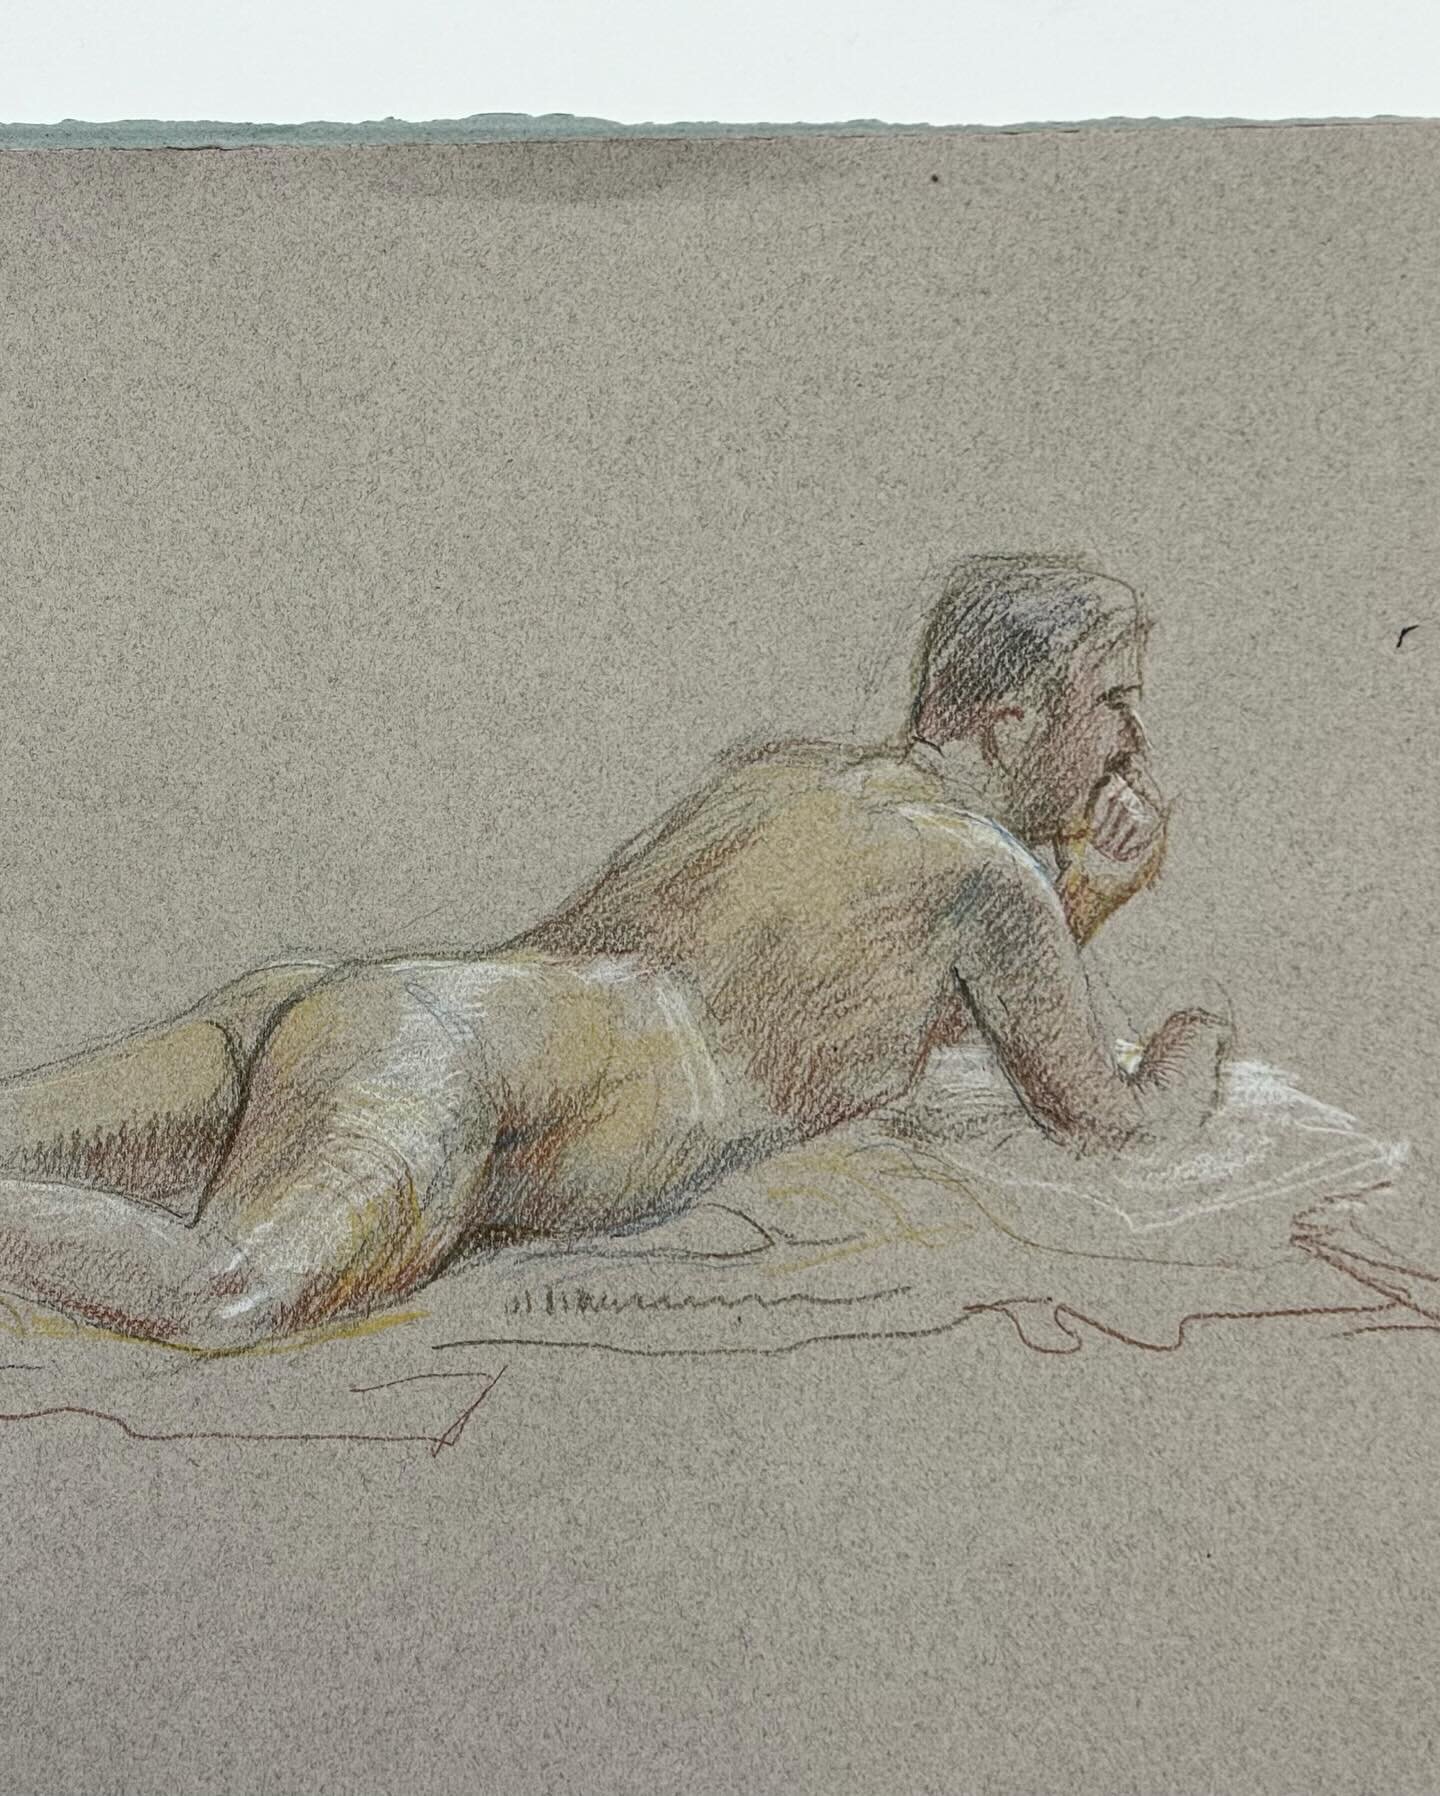 19th October. Life Drawing Event
We held our second life-drawing event of the year.  @paulvanheelis, our model, gave us some challenging poses, and our members responded with some amazingly well-observed work.  Amazing that all of these were done in 